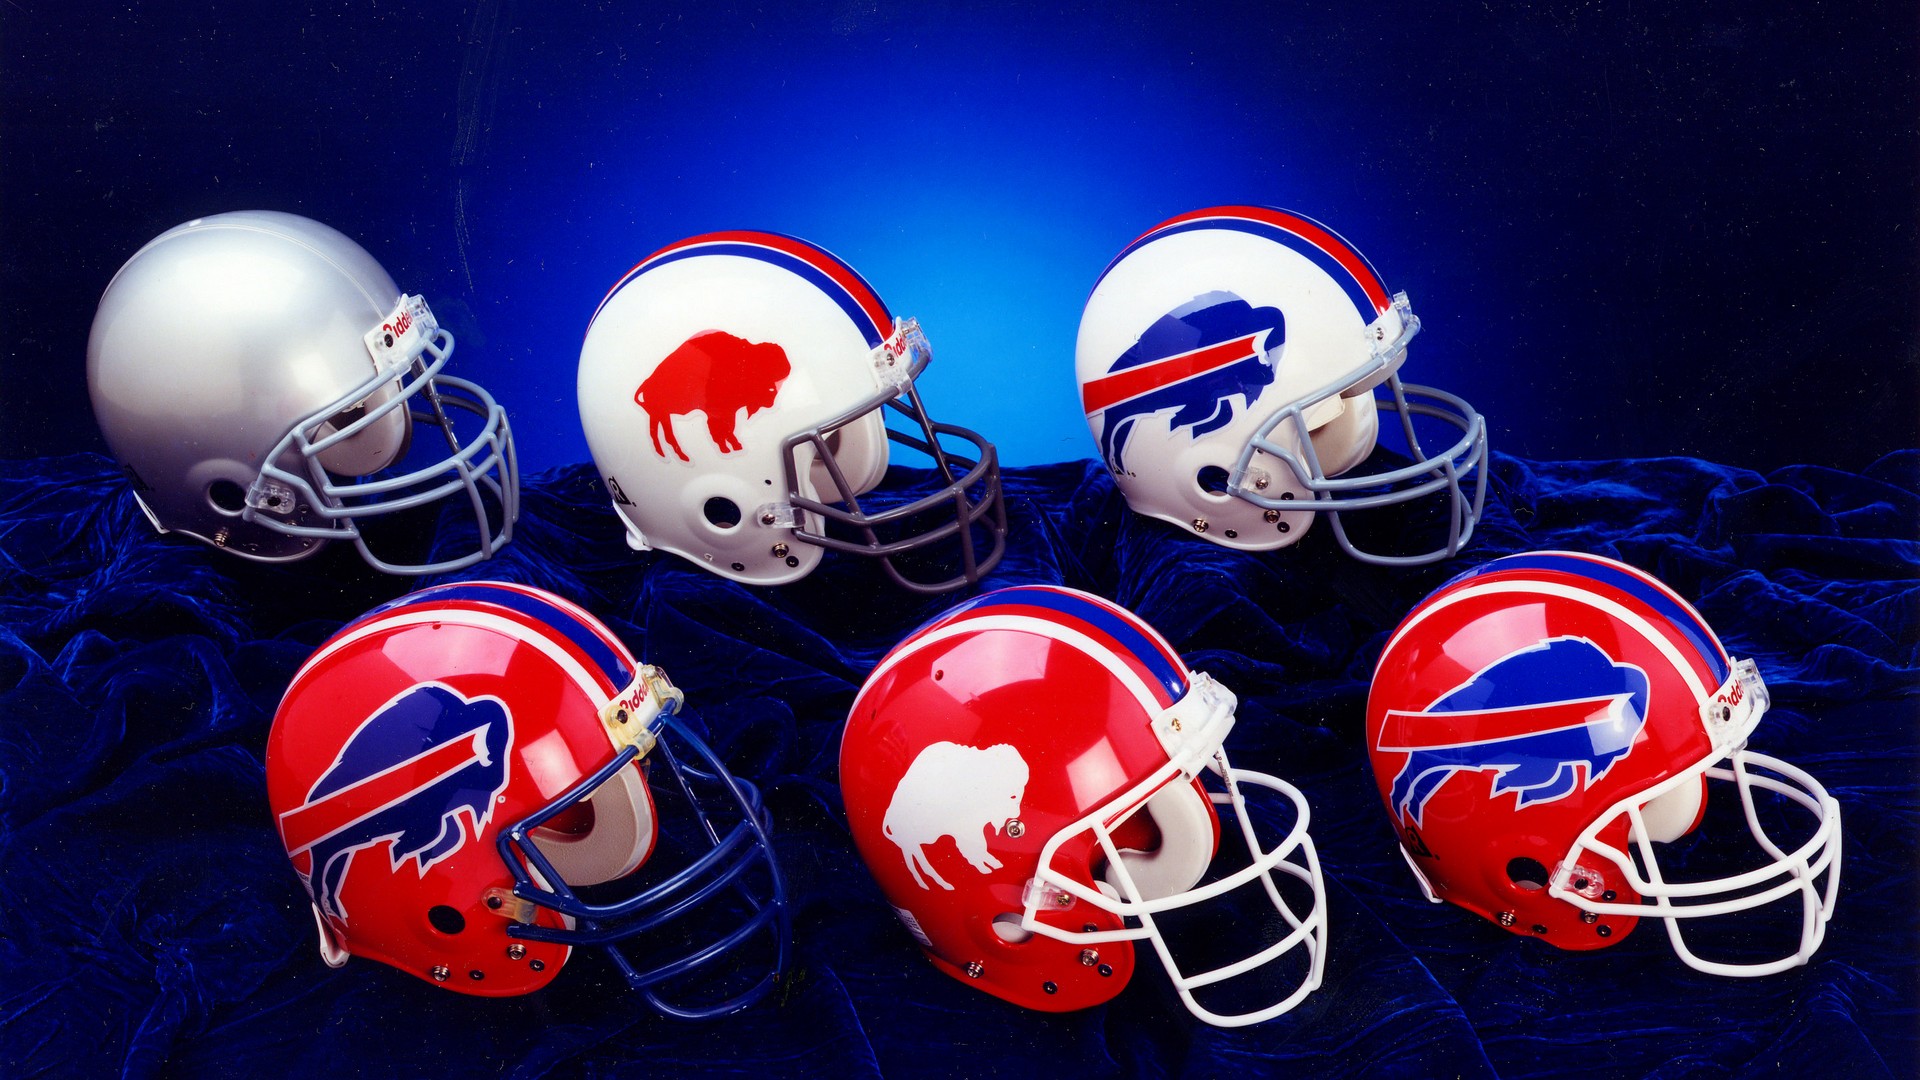 Buffalo Bills NFL Desktop Wallpapers With high-resolution 1920X1080 pixel. You can use this wallpaper for your Mac or Windows Desktop Background, iPhone, Android or Tablet and another Smartphone device